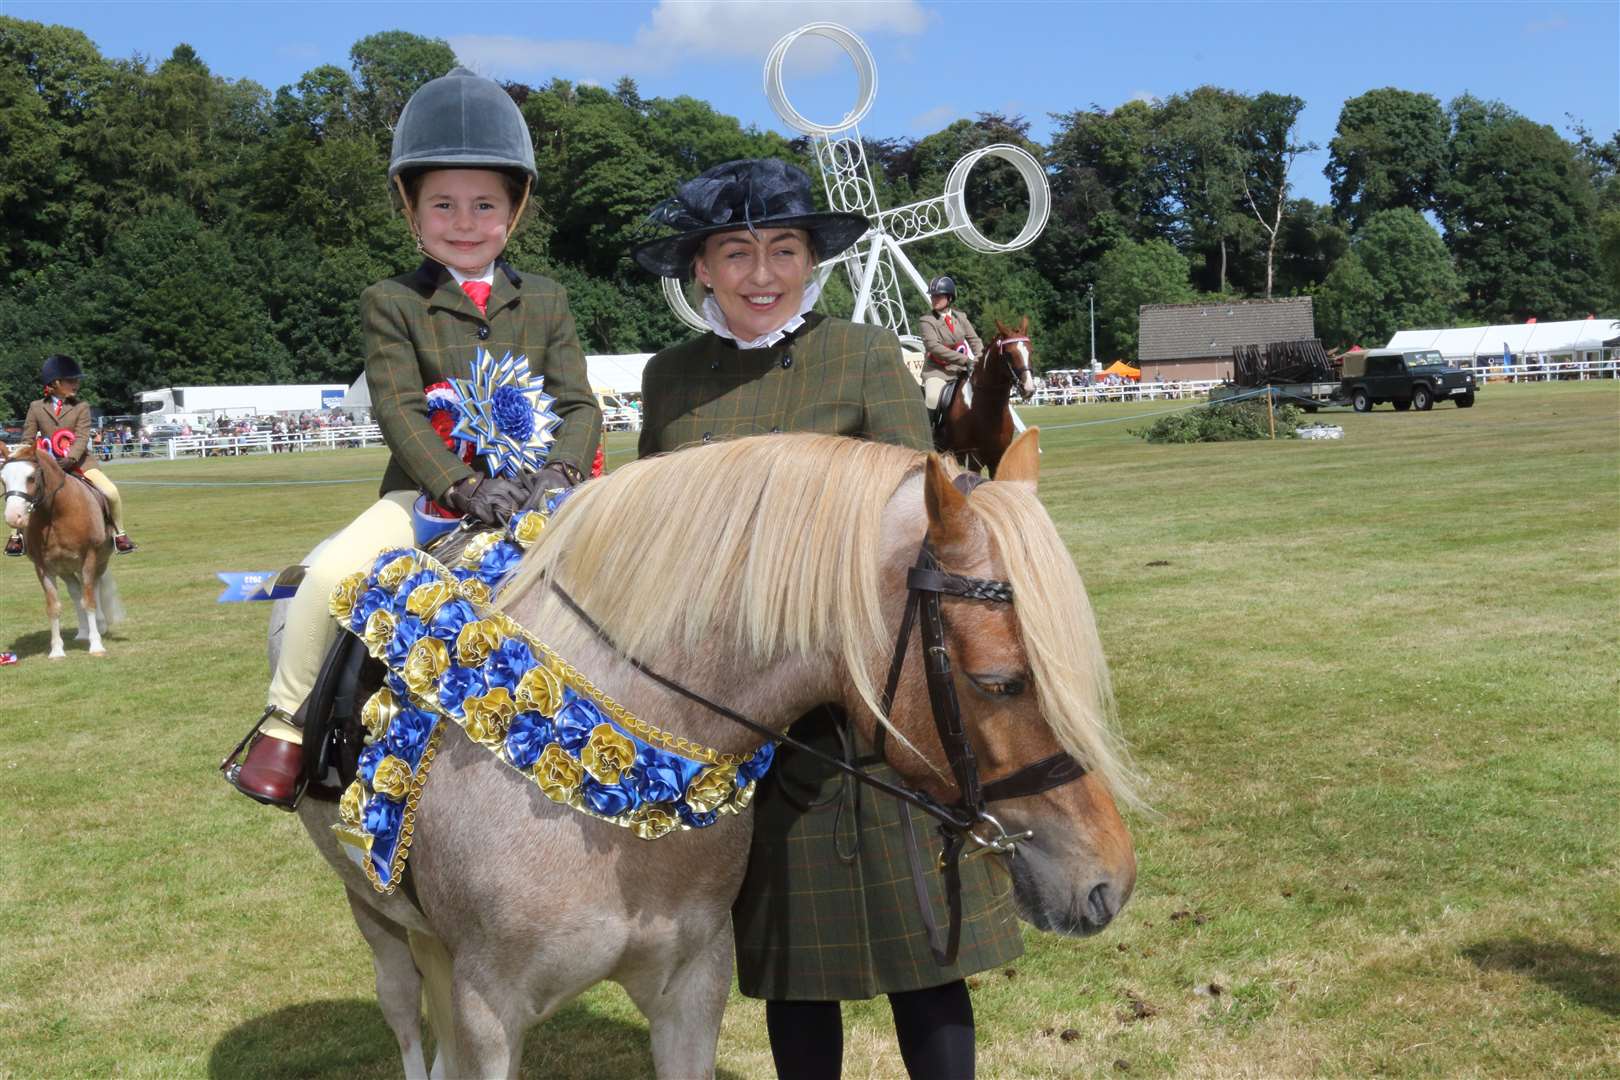 The reserve champion title went to Lingardswood Sarsaparilla which is owned by Shannon Mair and was ridden by Francesca Mair from Inverness.